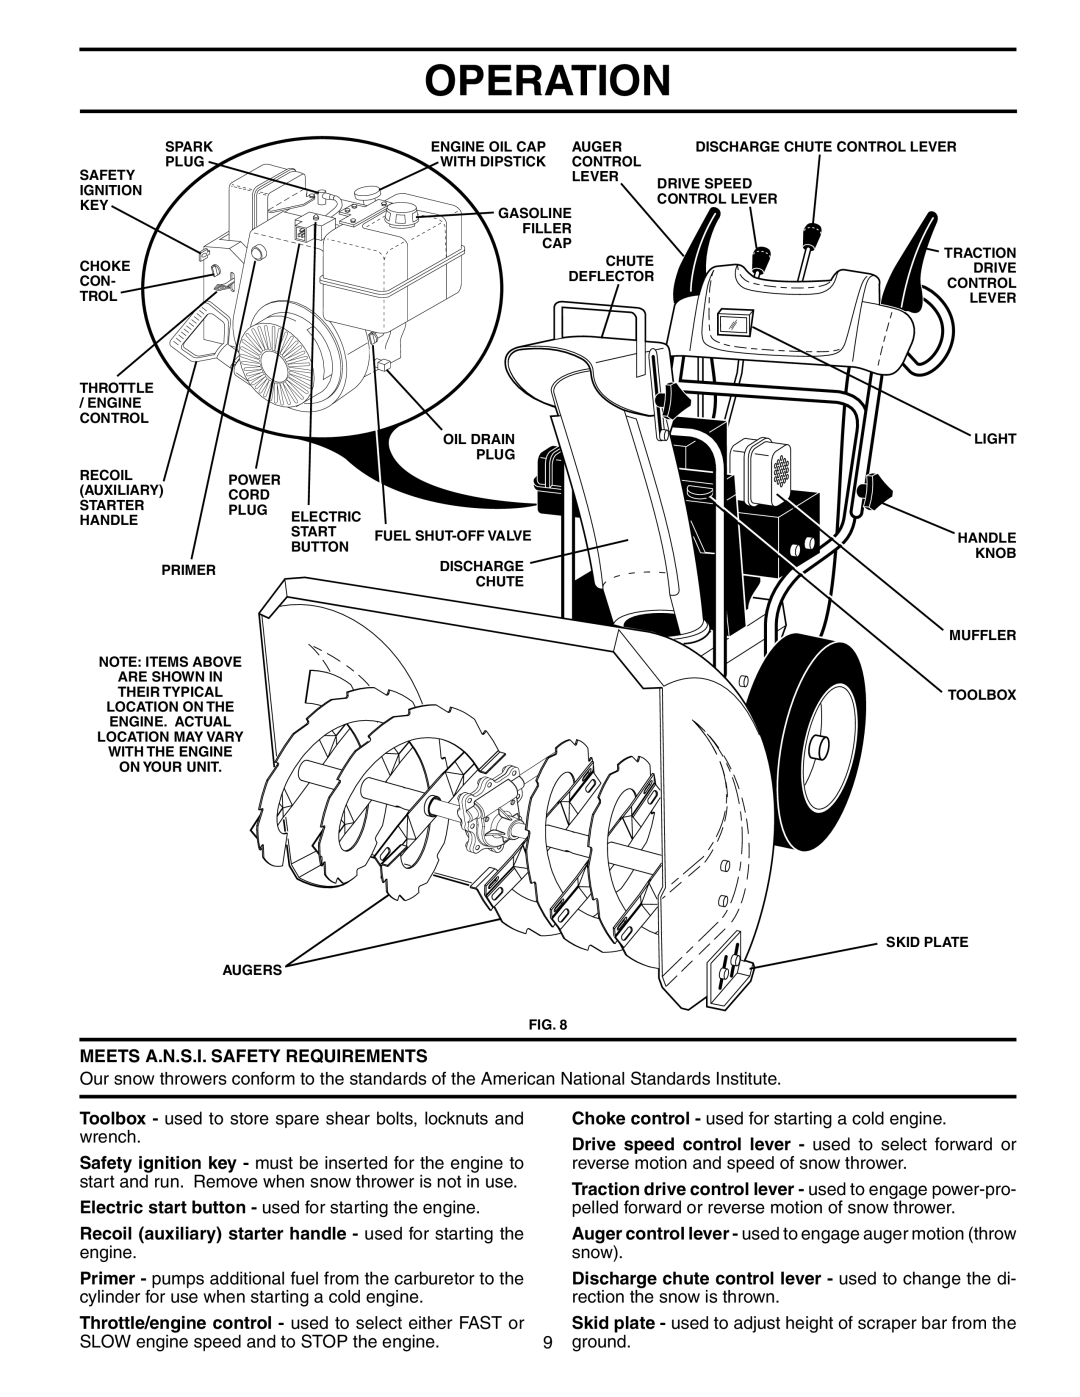 Husqvarna 1027STE owner manual Operation, Meets A.N.S.I. Safety Requirements 